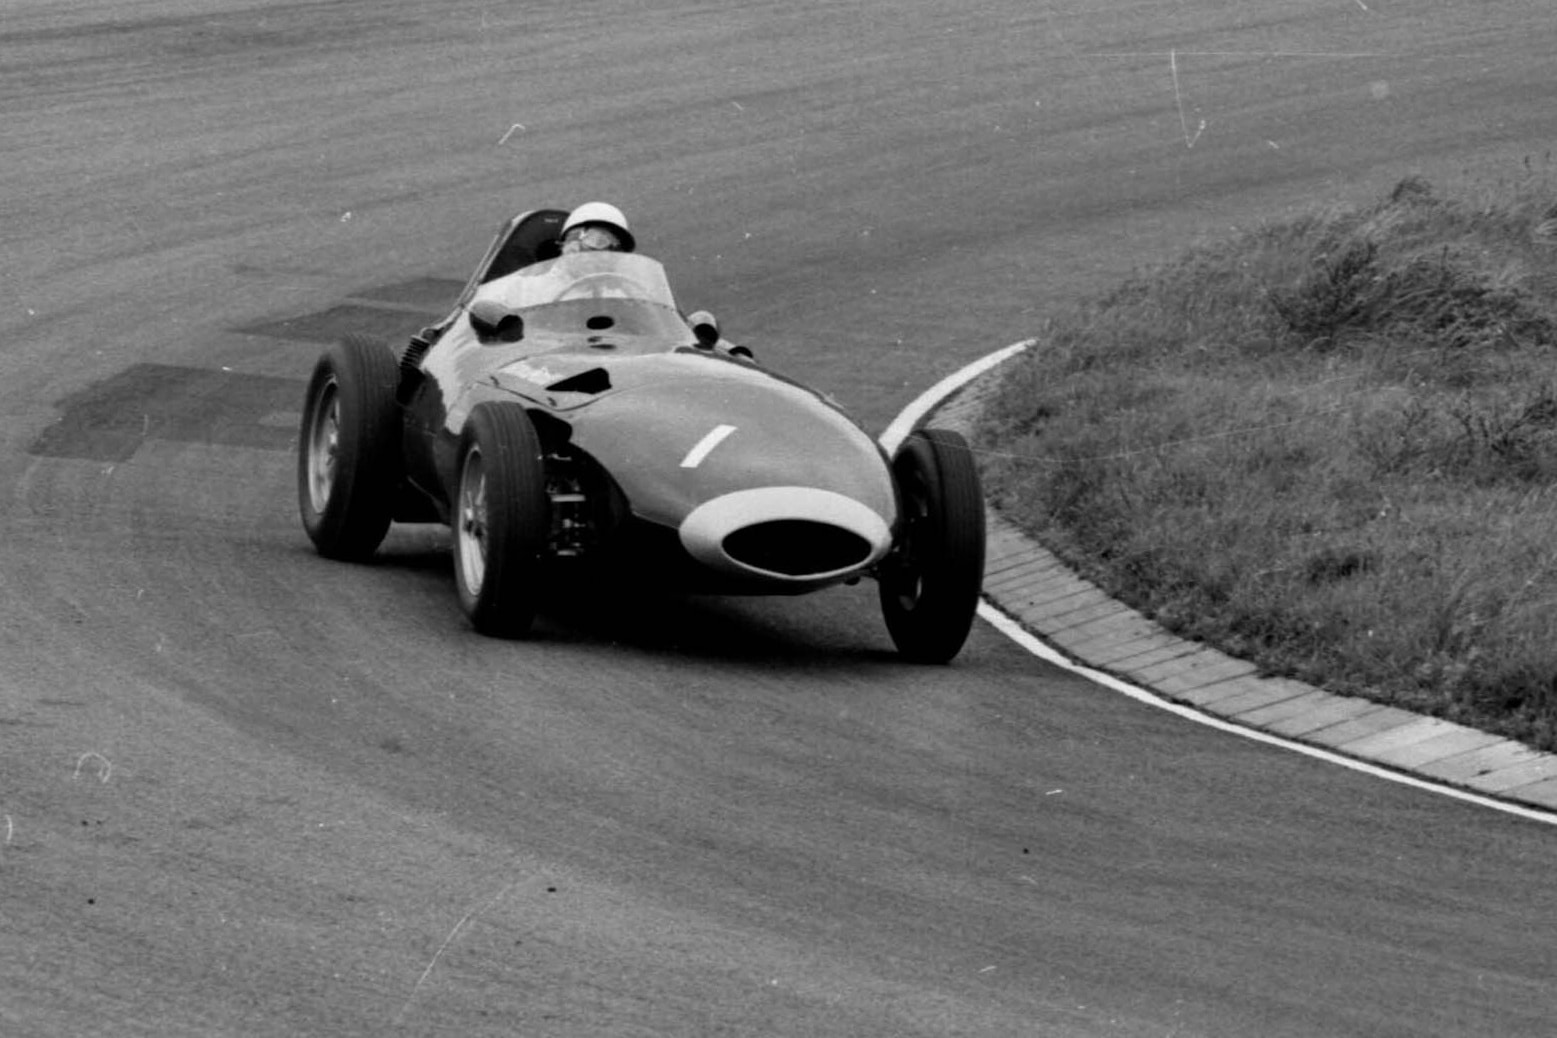 Stirling Moss in 1st postion driving the Vanwall